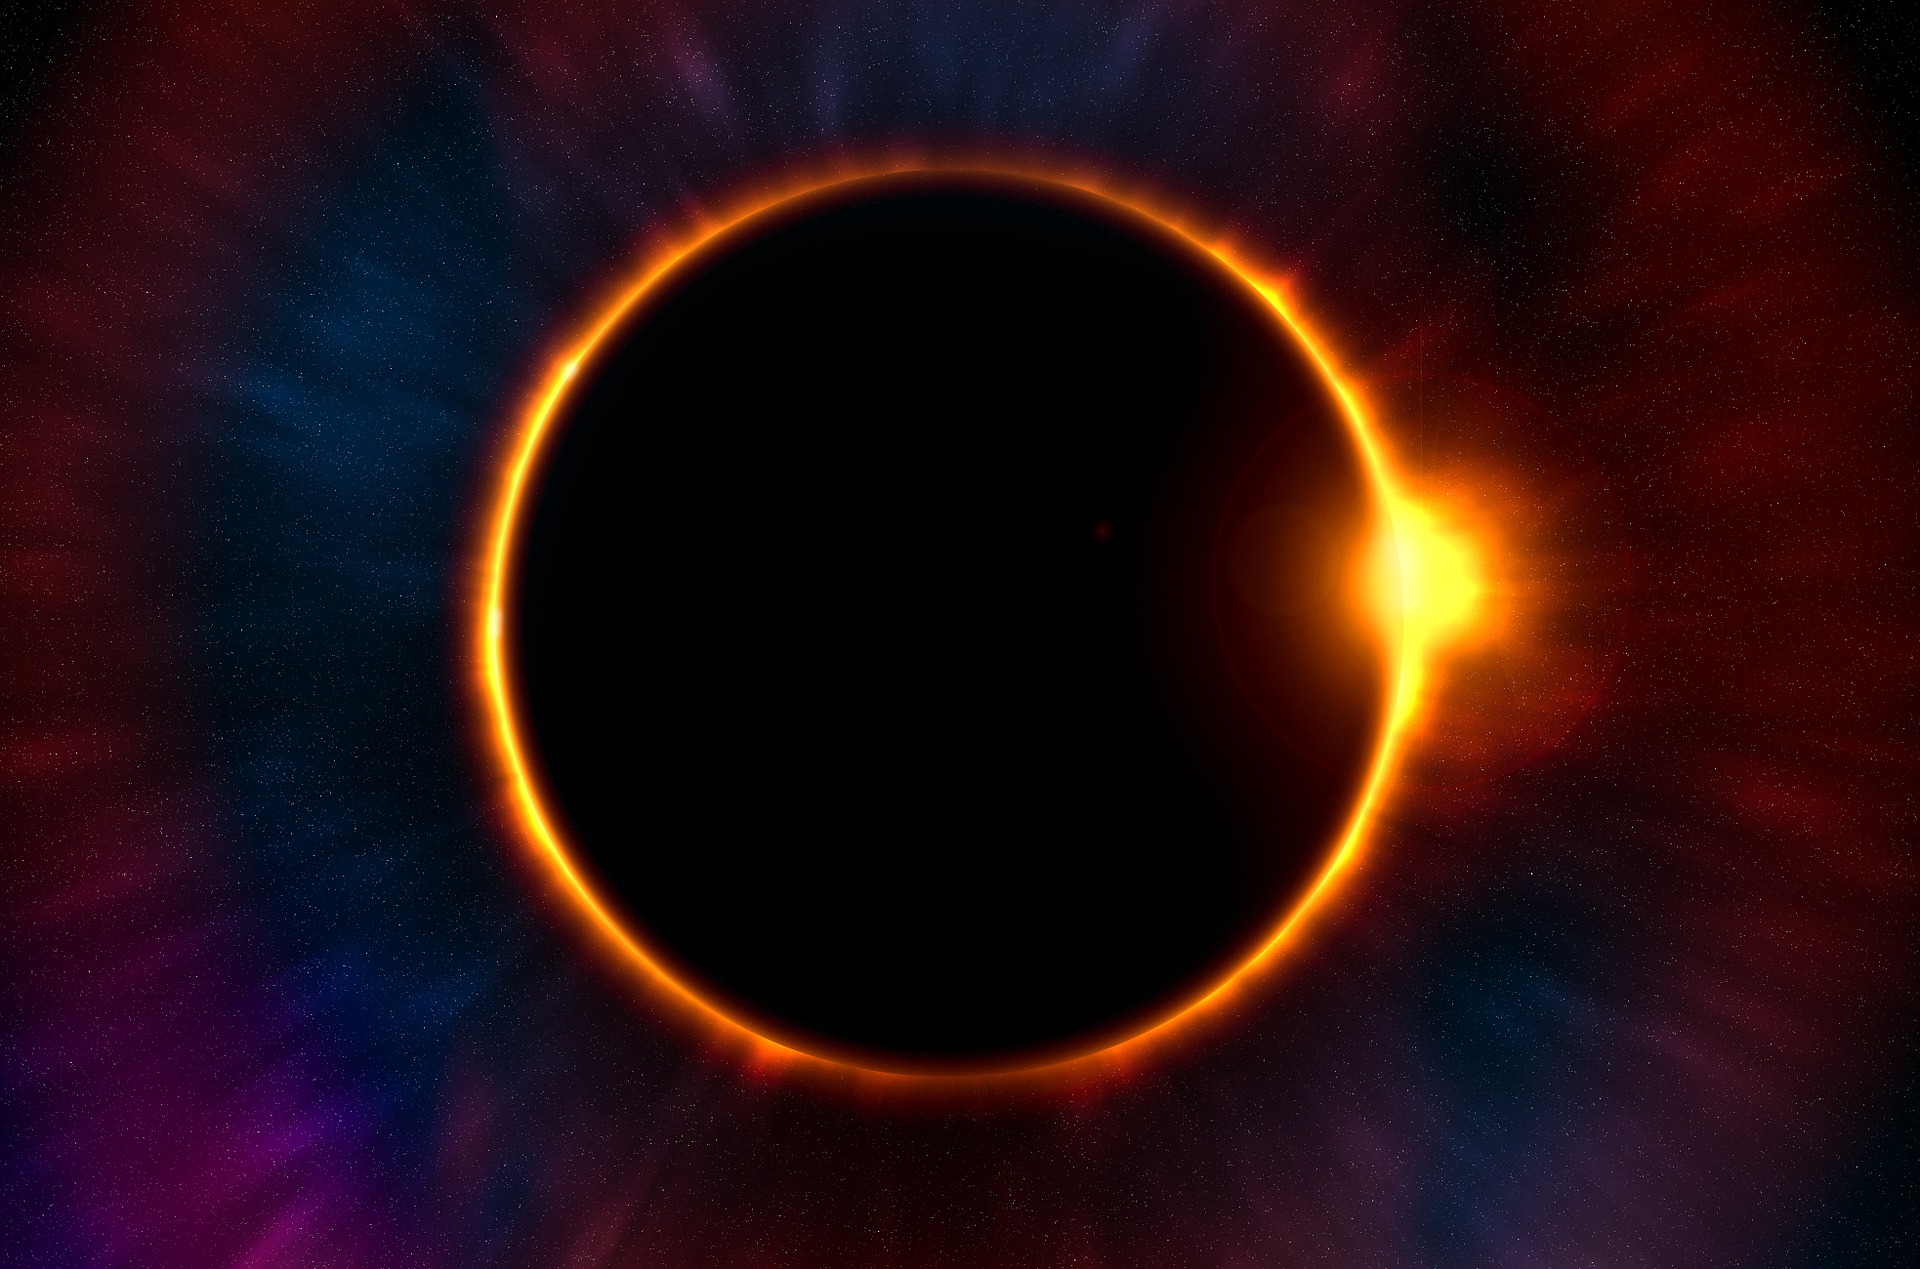 This image depicts a solar eclipse. 